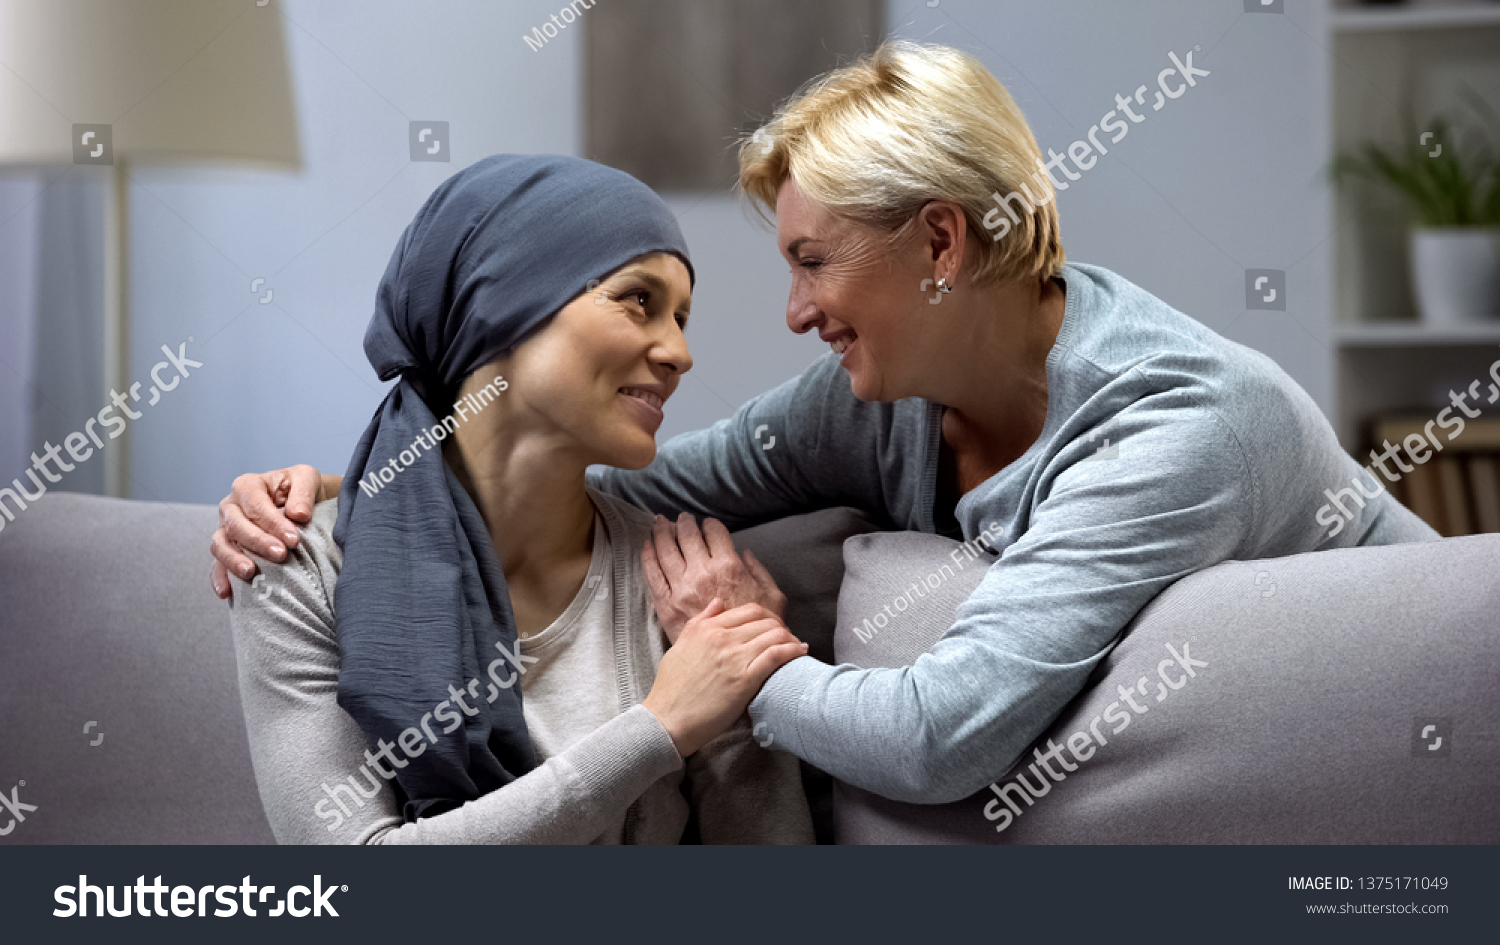 Mom supporting and hugging her daughter with cancer, visits in oncohospital #1375171049